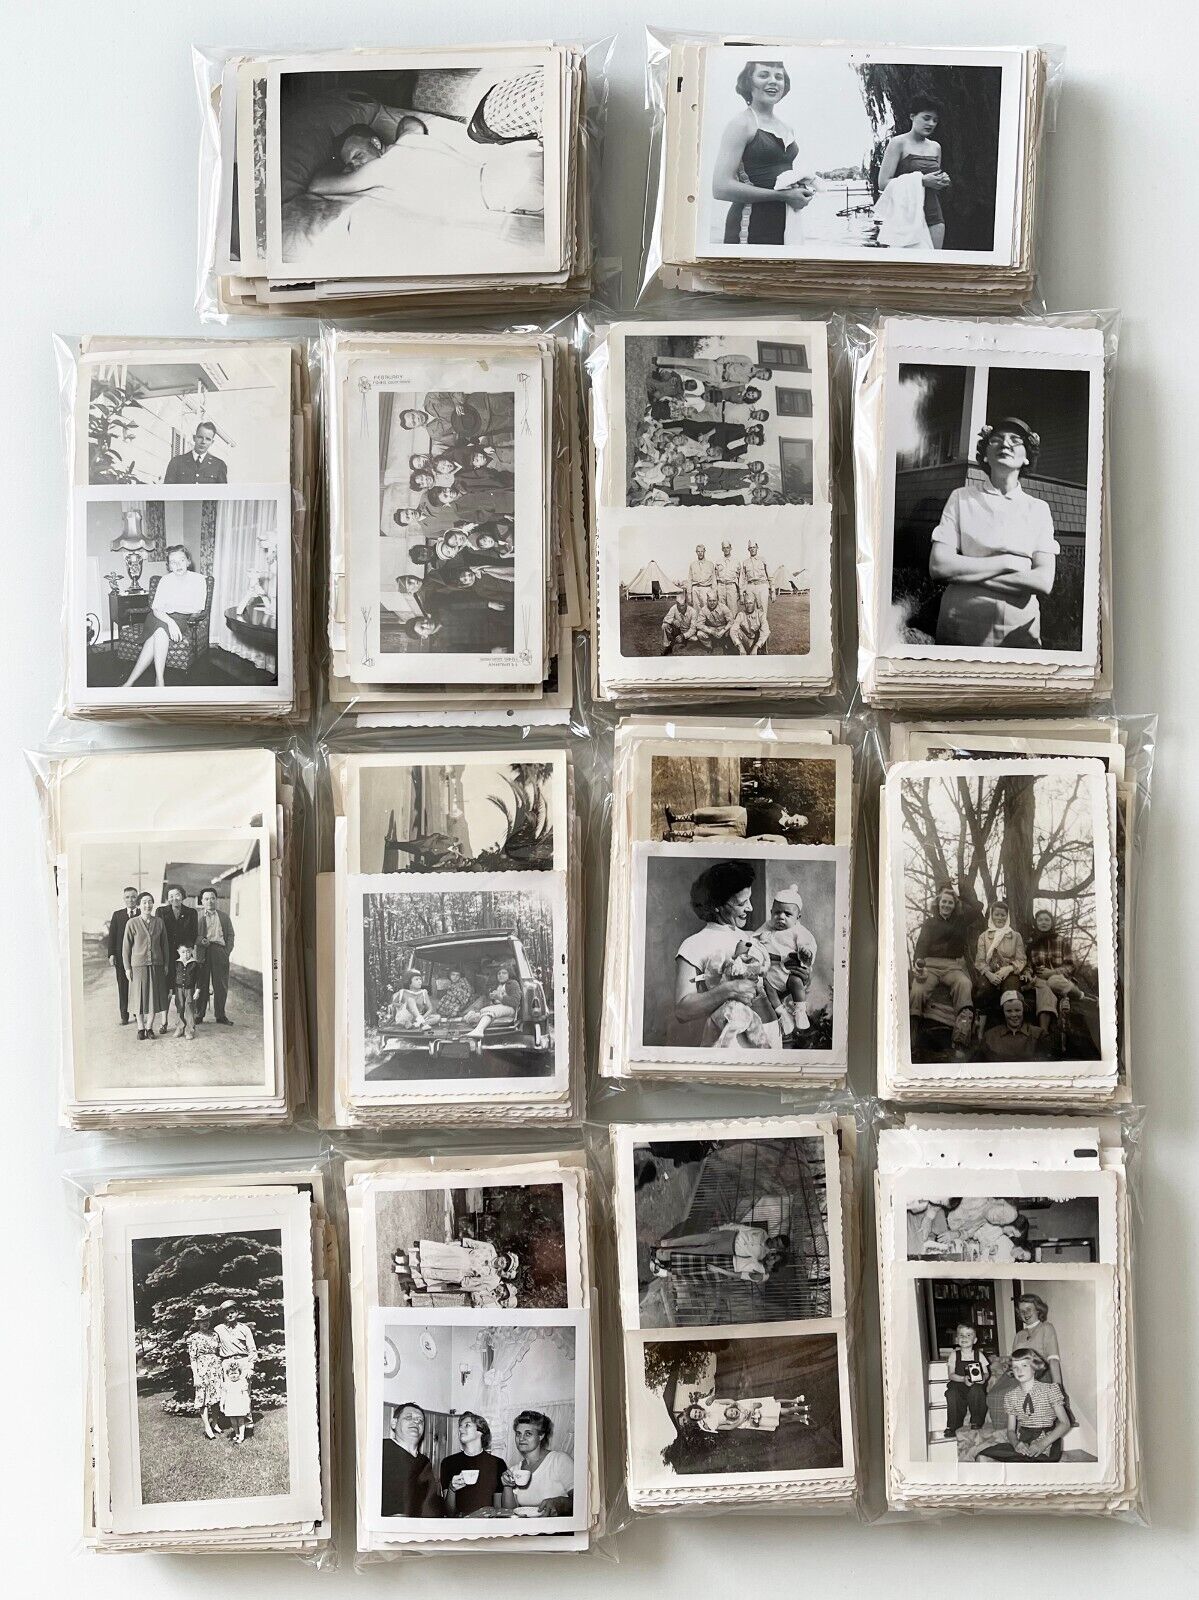 Vintage PEOPLE Photo Lot of 100 random B&W and Sepia Snapshots Old Photos